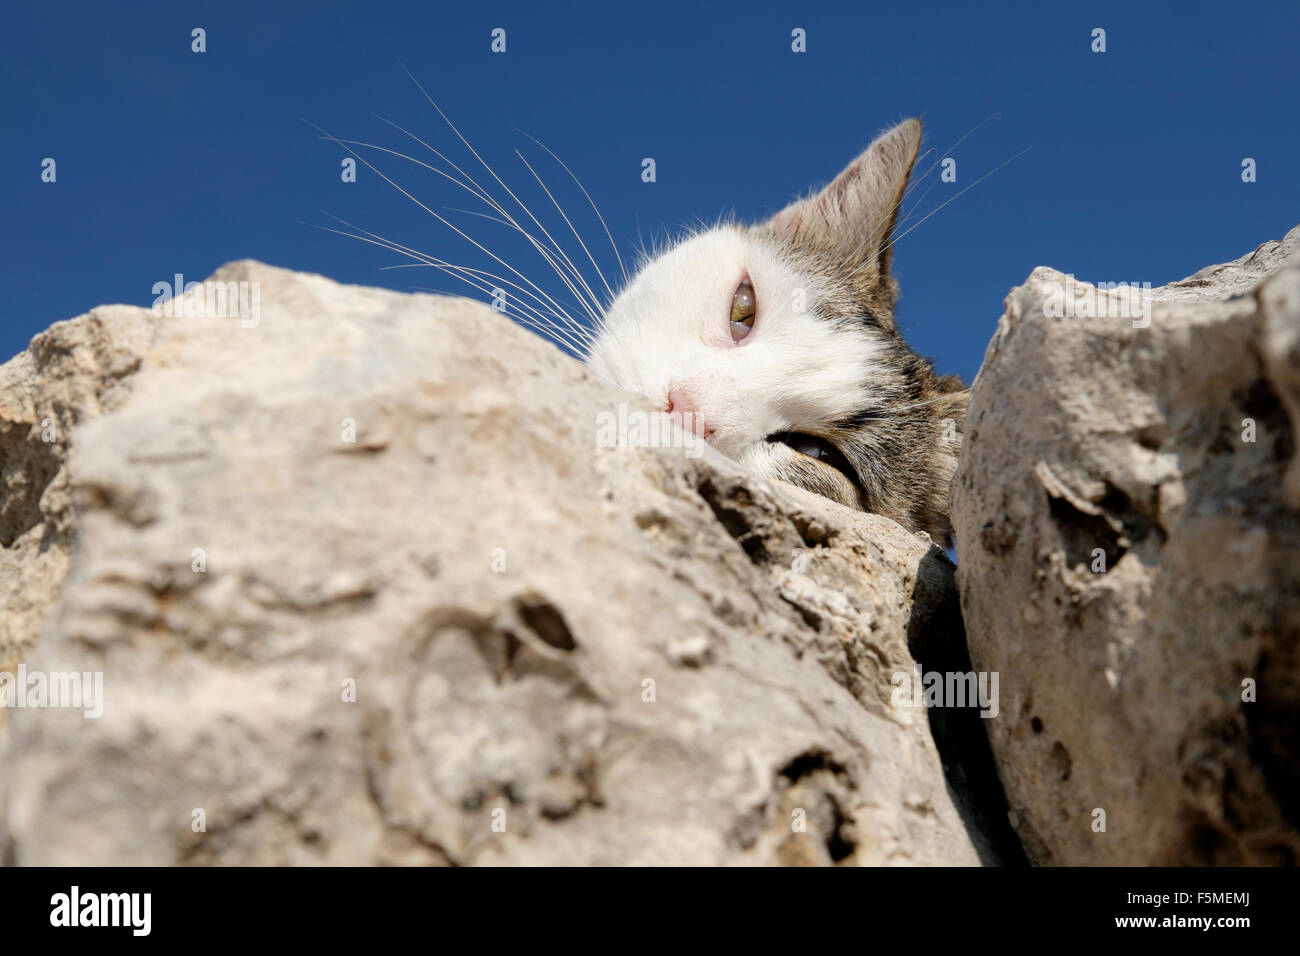 A tabby cat lying on a stone wall looks directly at the viewer Stock Photo